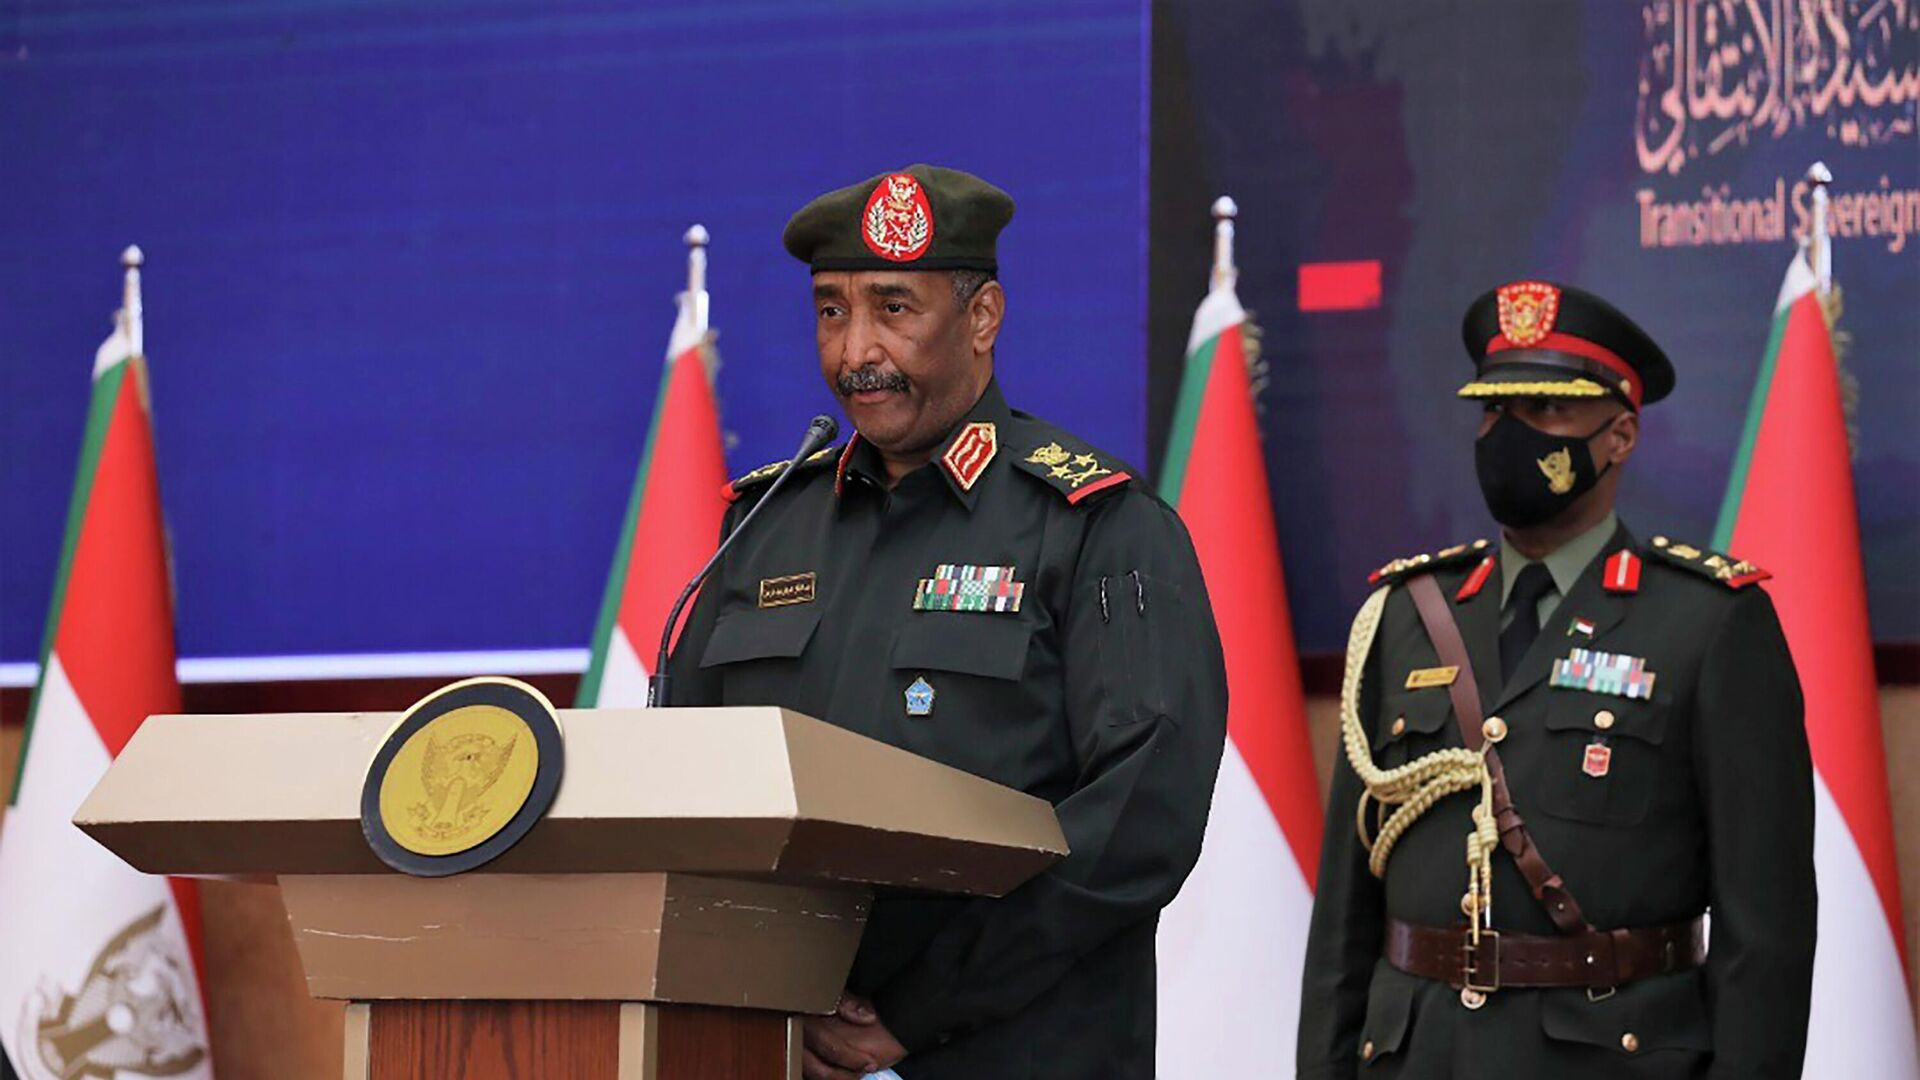 In this photo provided by the Sudan Transitional Sovereign Council, Sudan's top general Abdel Fattah Al-Burhan, center, speaks during a ceremony to reinstate Prime Minister Abdalla Hamdok, who was deposed in a coup last month, in Khartoum, Sudan, Sunday Nov. 21, 2021. Burhan, said in televised statements that Hamdok will lead an independent technocratic cabinet until elections can be held. It would still remain under military oversight. - Sputnik International, 1920, 14.02.2022